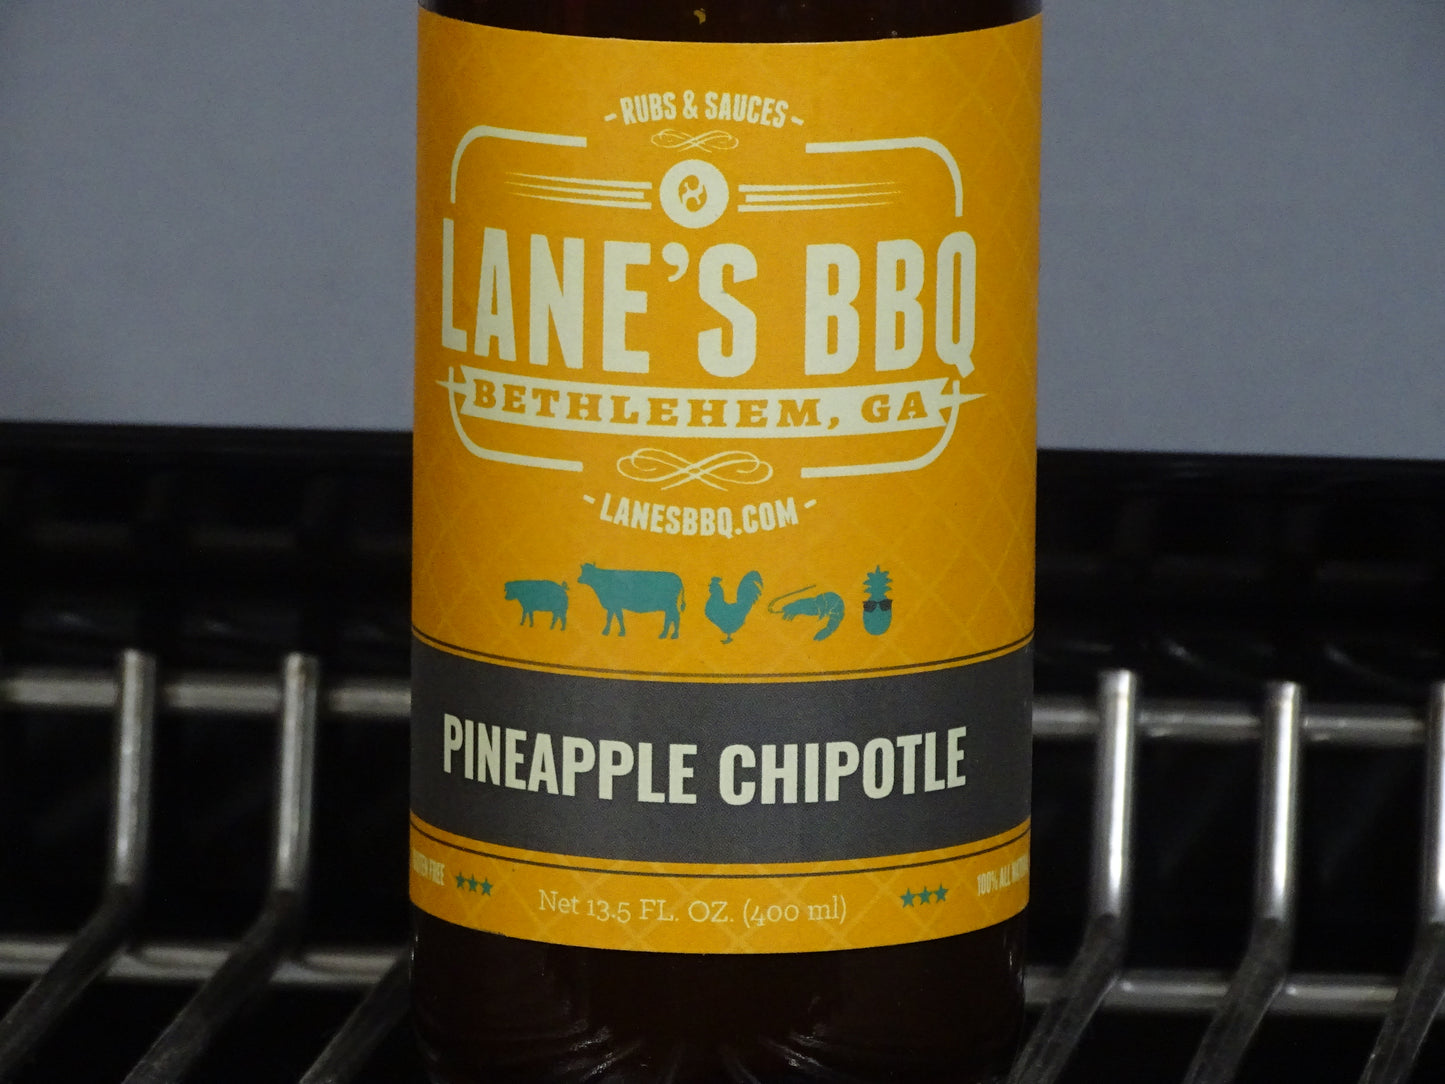 Pineapple Chipotle